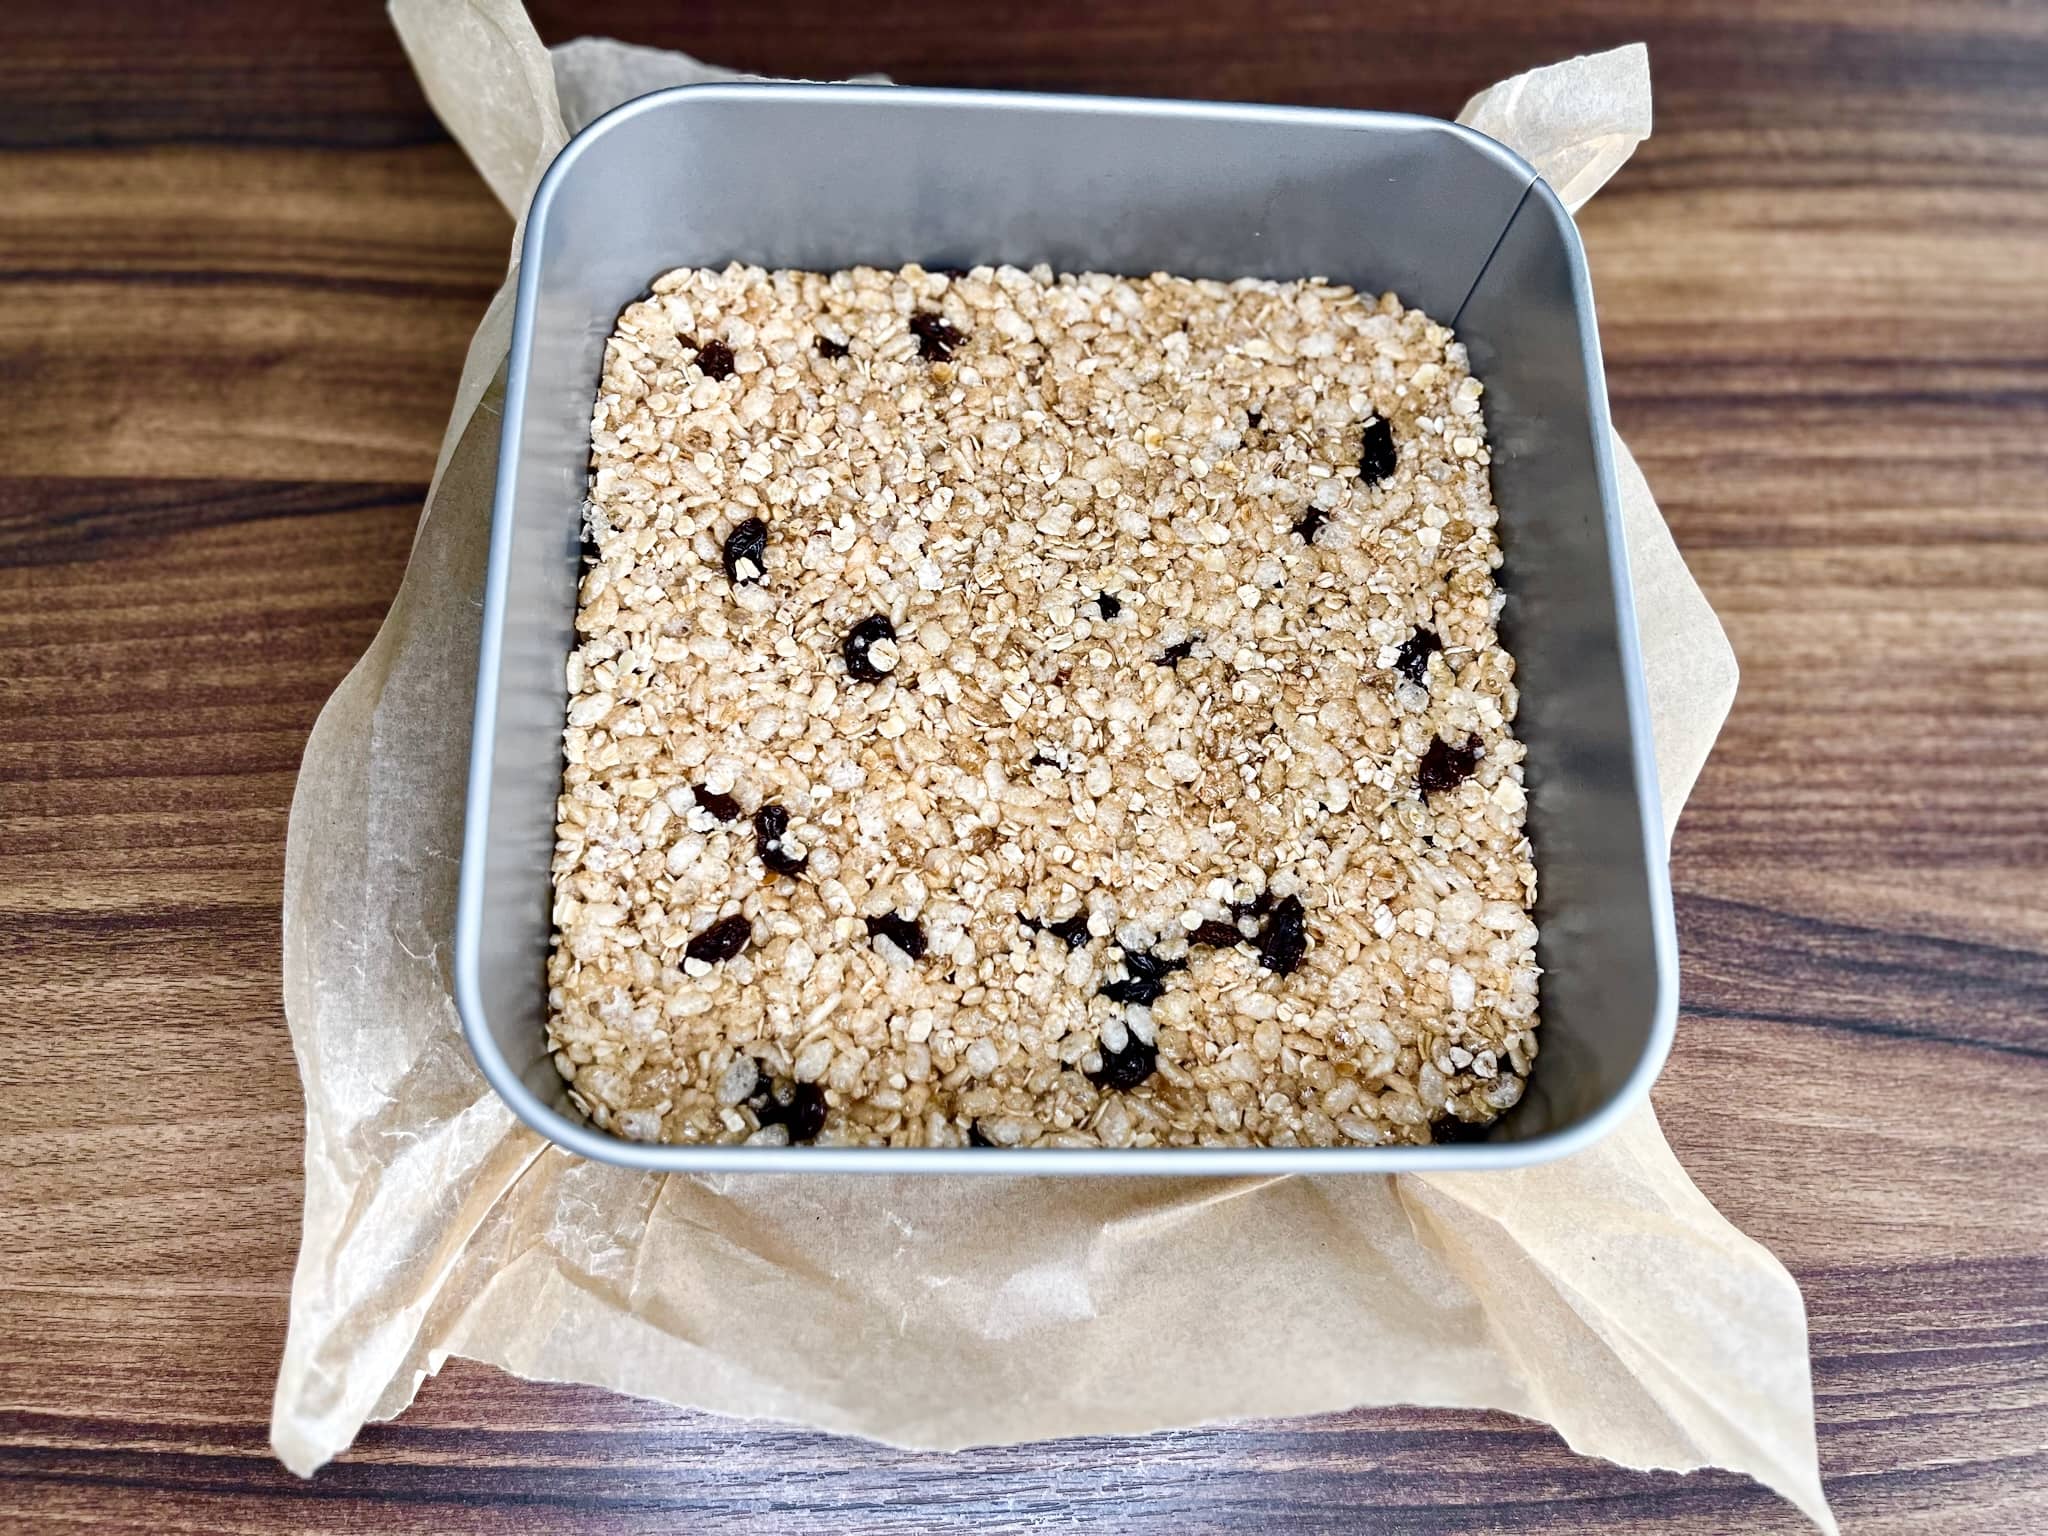 Nicely flatten the Rice Krispie mixture in a square tin